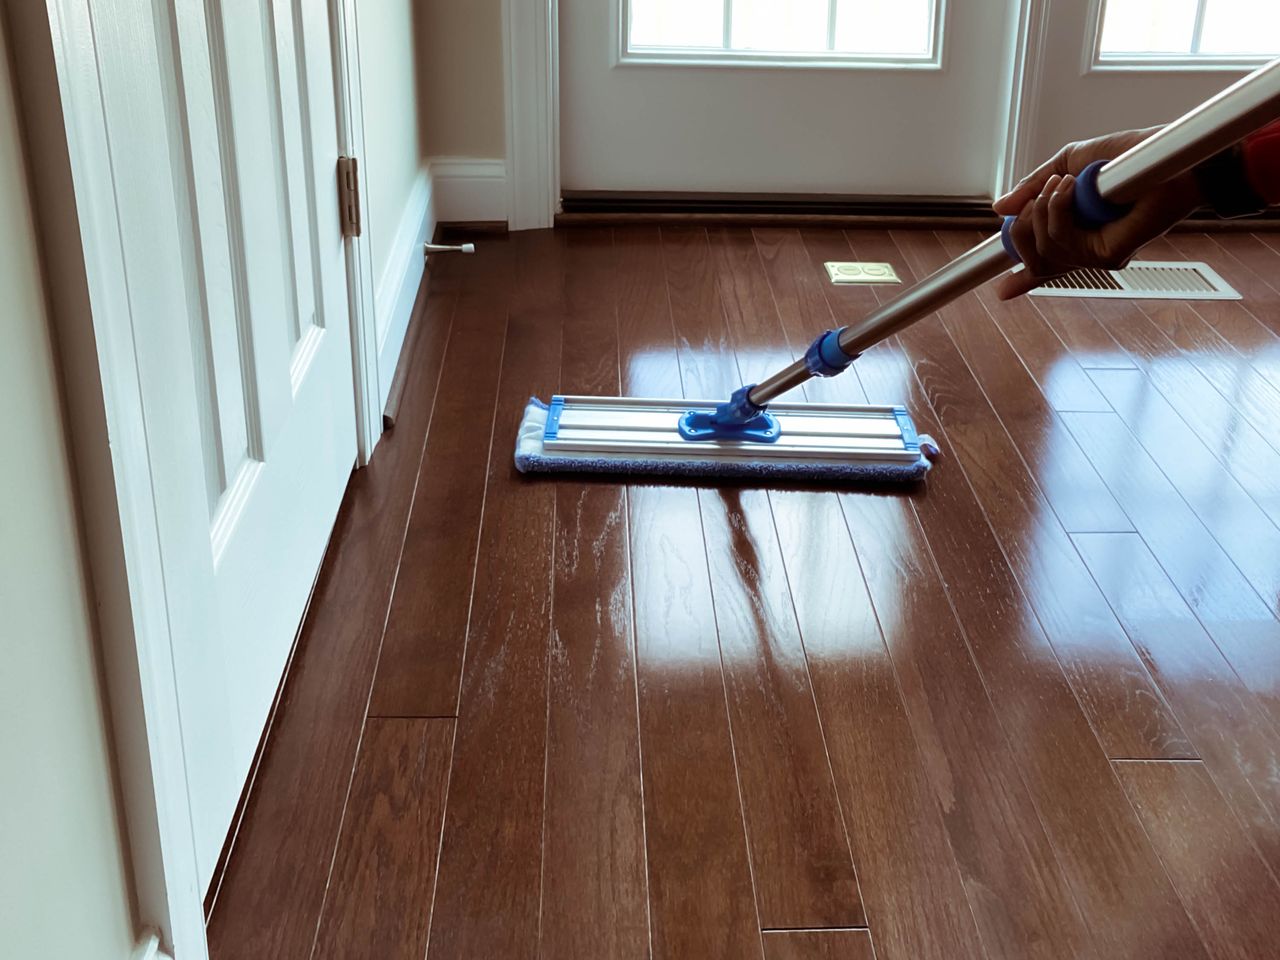 Restore shine to laminate floors with a simple homemade solution